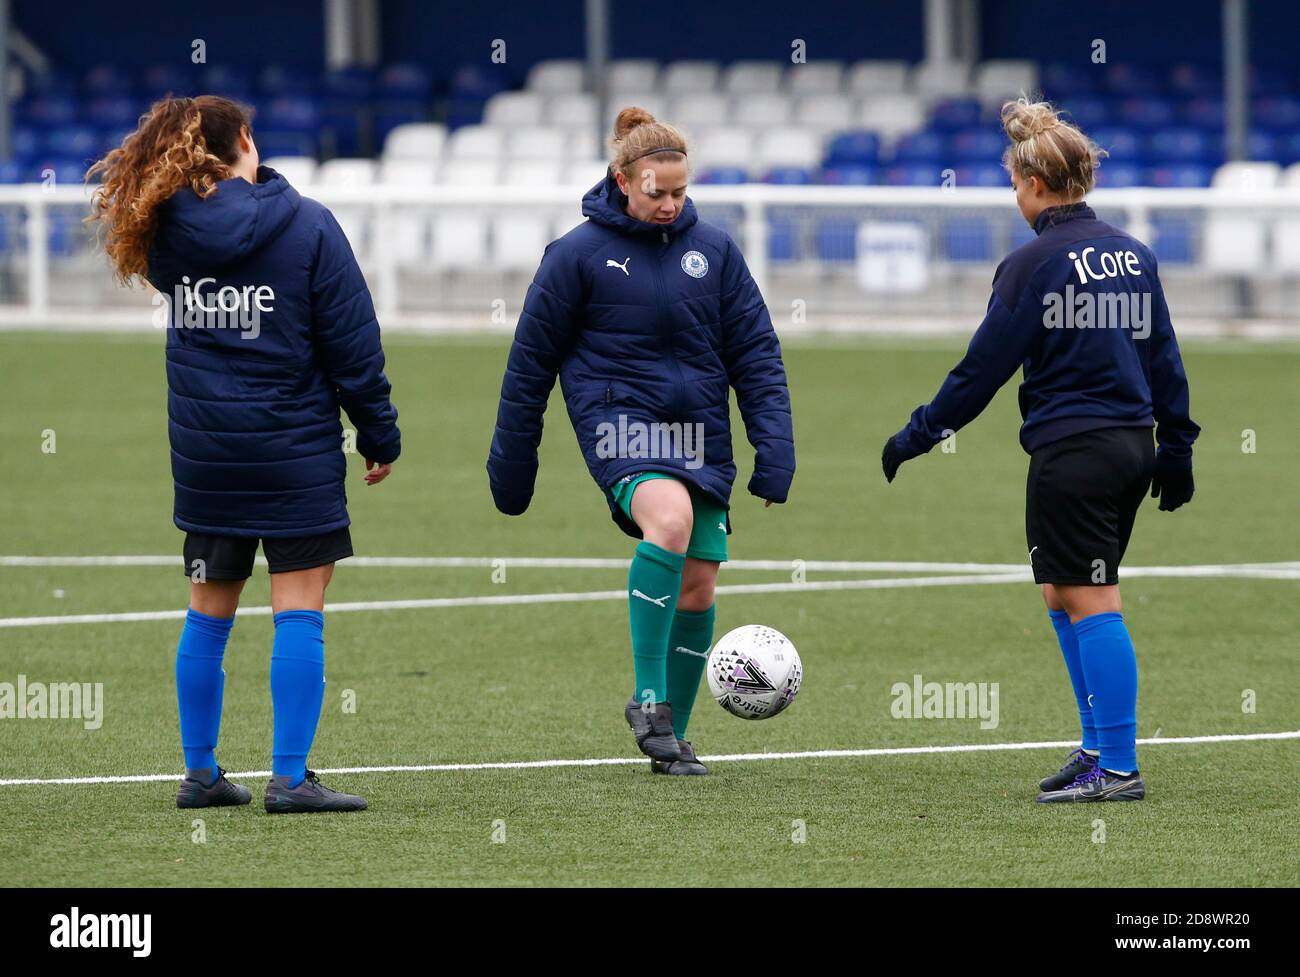 Billericay, UK. 1st November, 2020. BILLERICAY, United Kingdom, NOVEMBER01: Amy Mullett of Billericay Town Ladies during the pre-match warm-up during The Vitality Women's FA Cup Third Round Qualifying between Billericay Town Ladies and Chasham United Ladies at New Lodge, Billericay on 01st November, 2020 Credit: Action Foto Sport/Alamy Live News Stock Photo